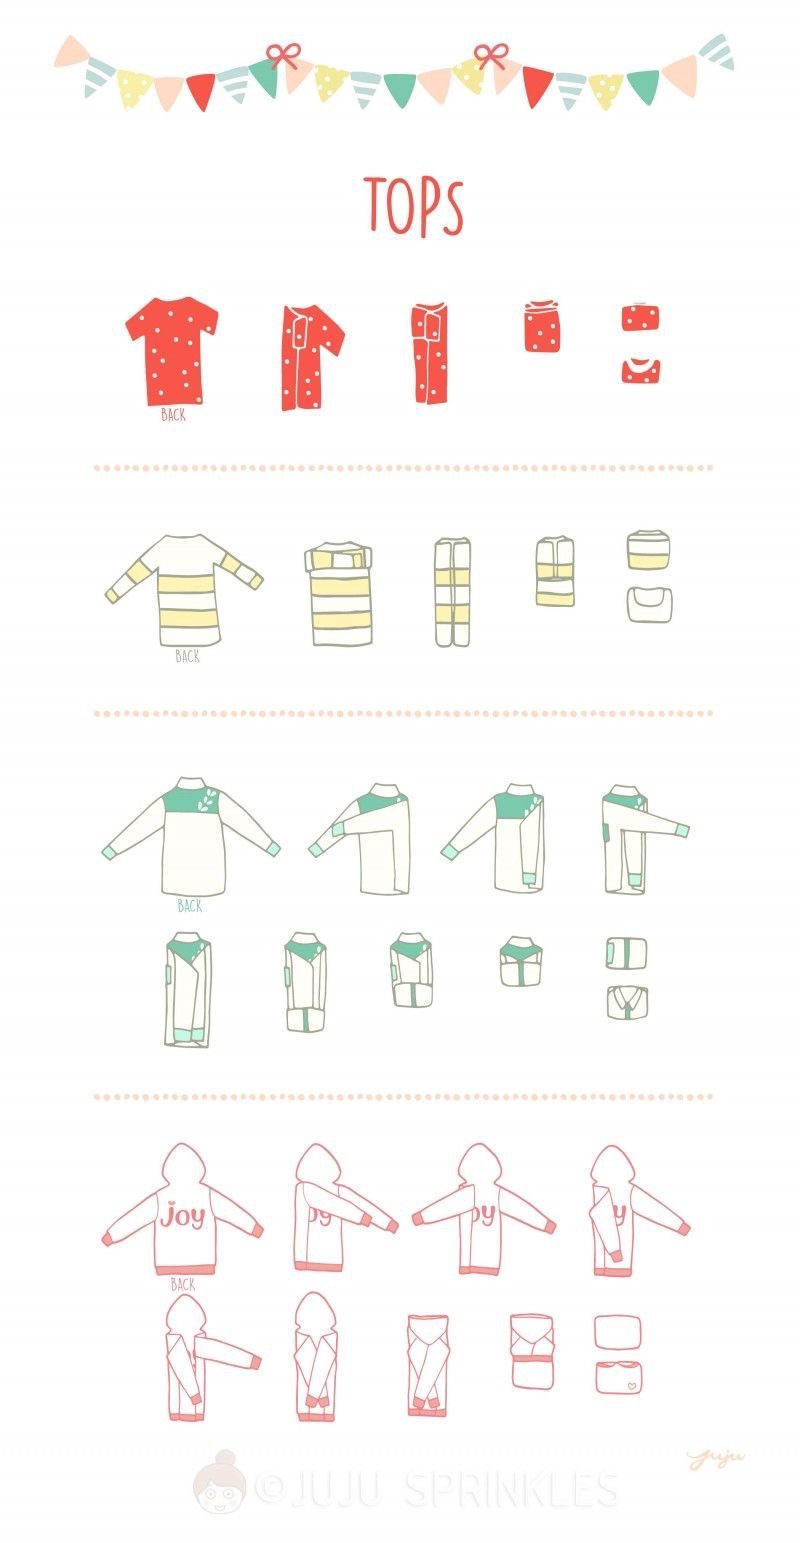 How to Make Your Clothes Last Longer – The Easy Guide to Caring for Your Clothes | Sustainable Fashion 101